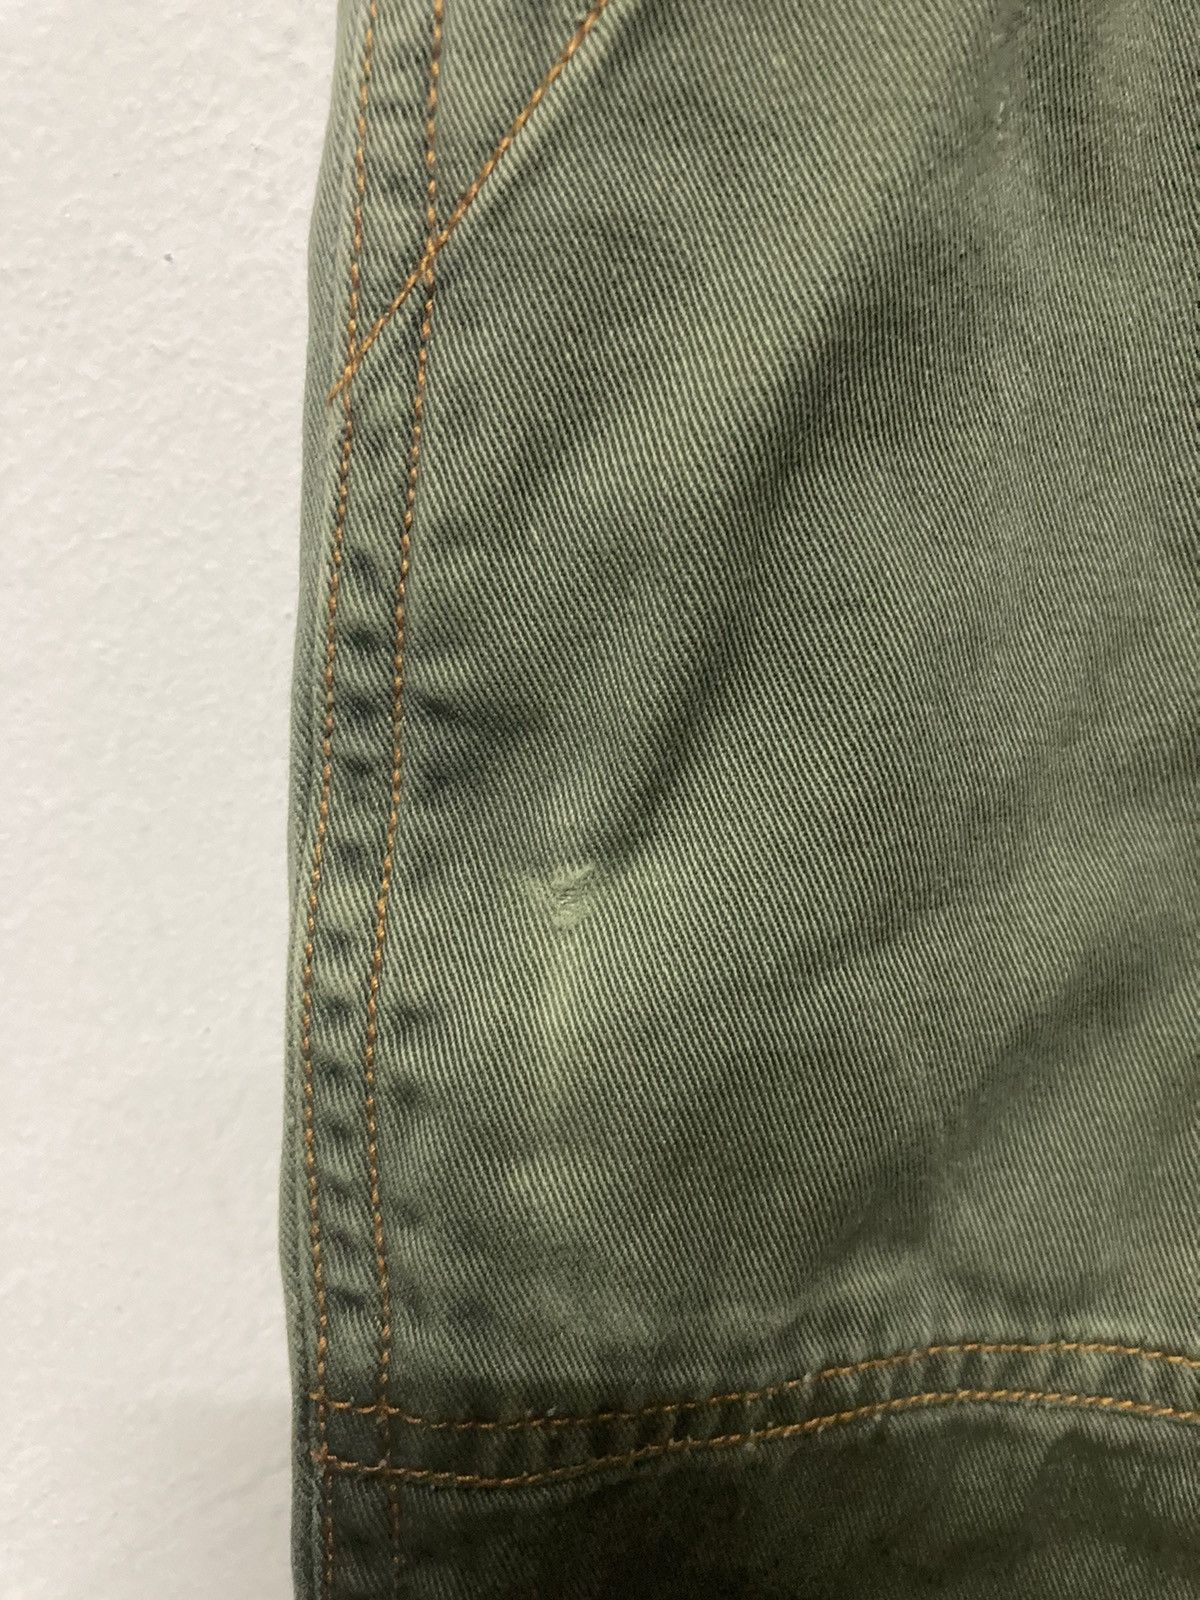 Vintage Soldout Japanese Brand Large Pocket Army Style Pants - 9